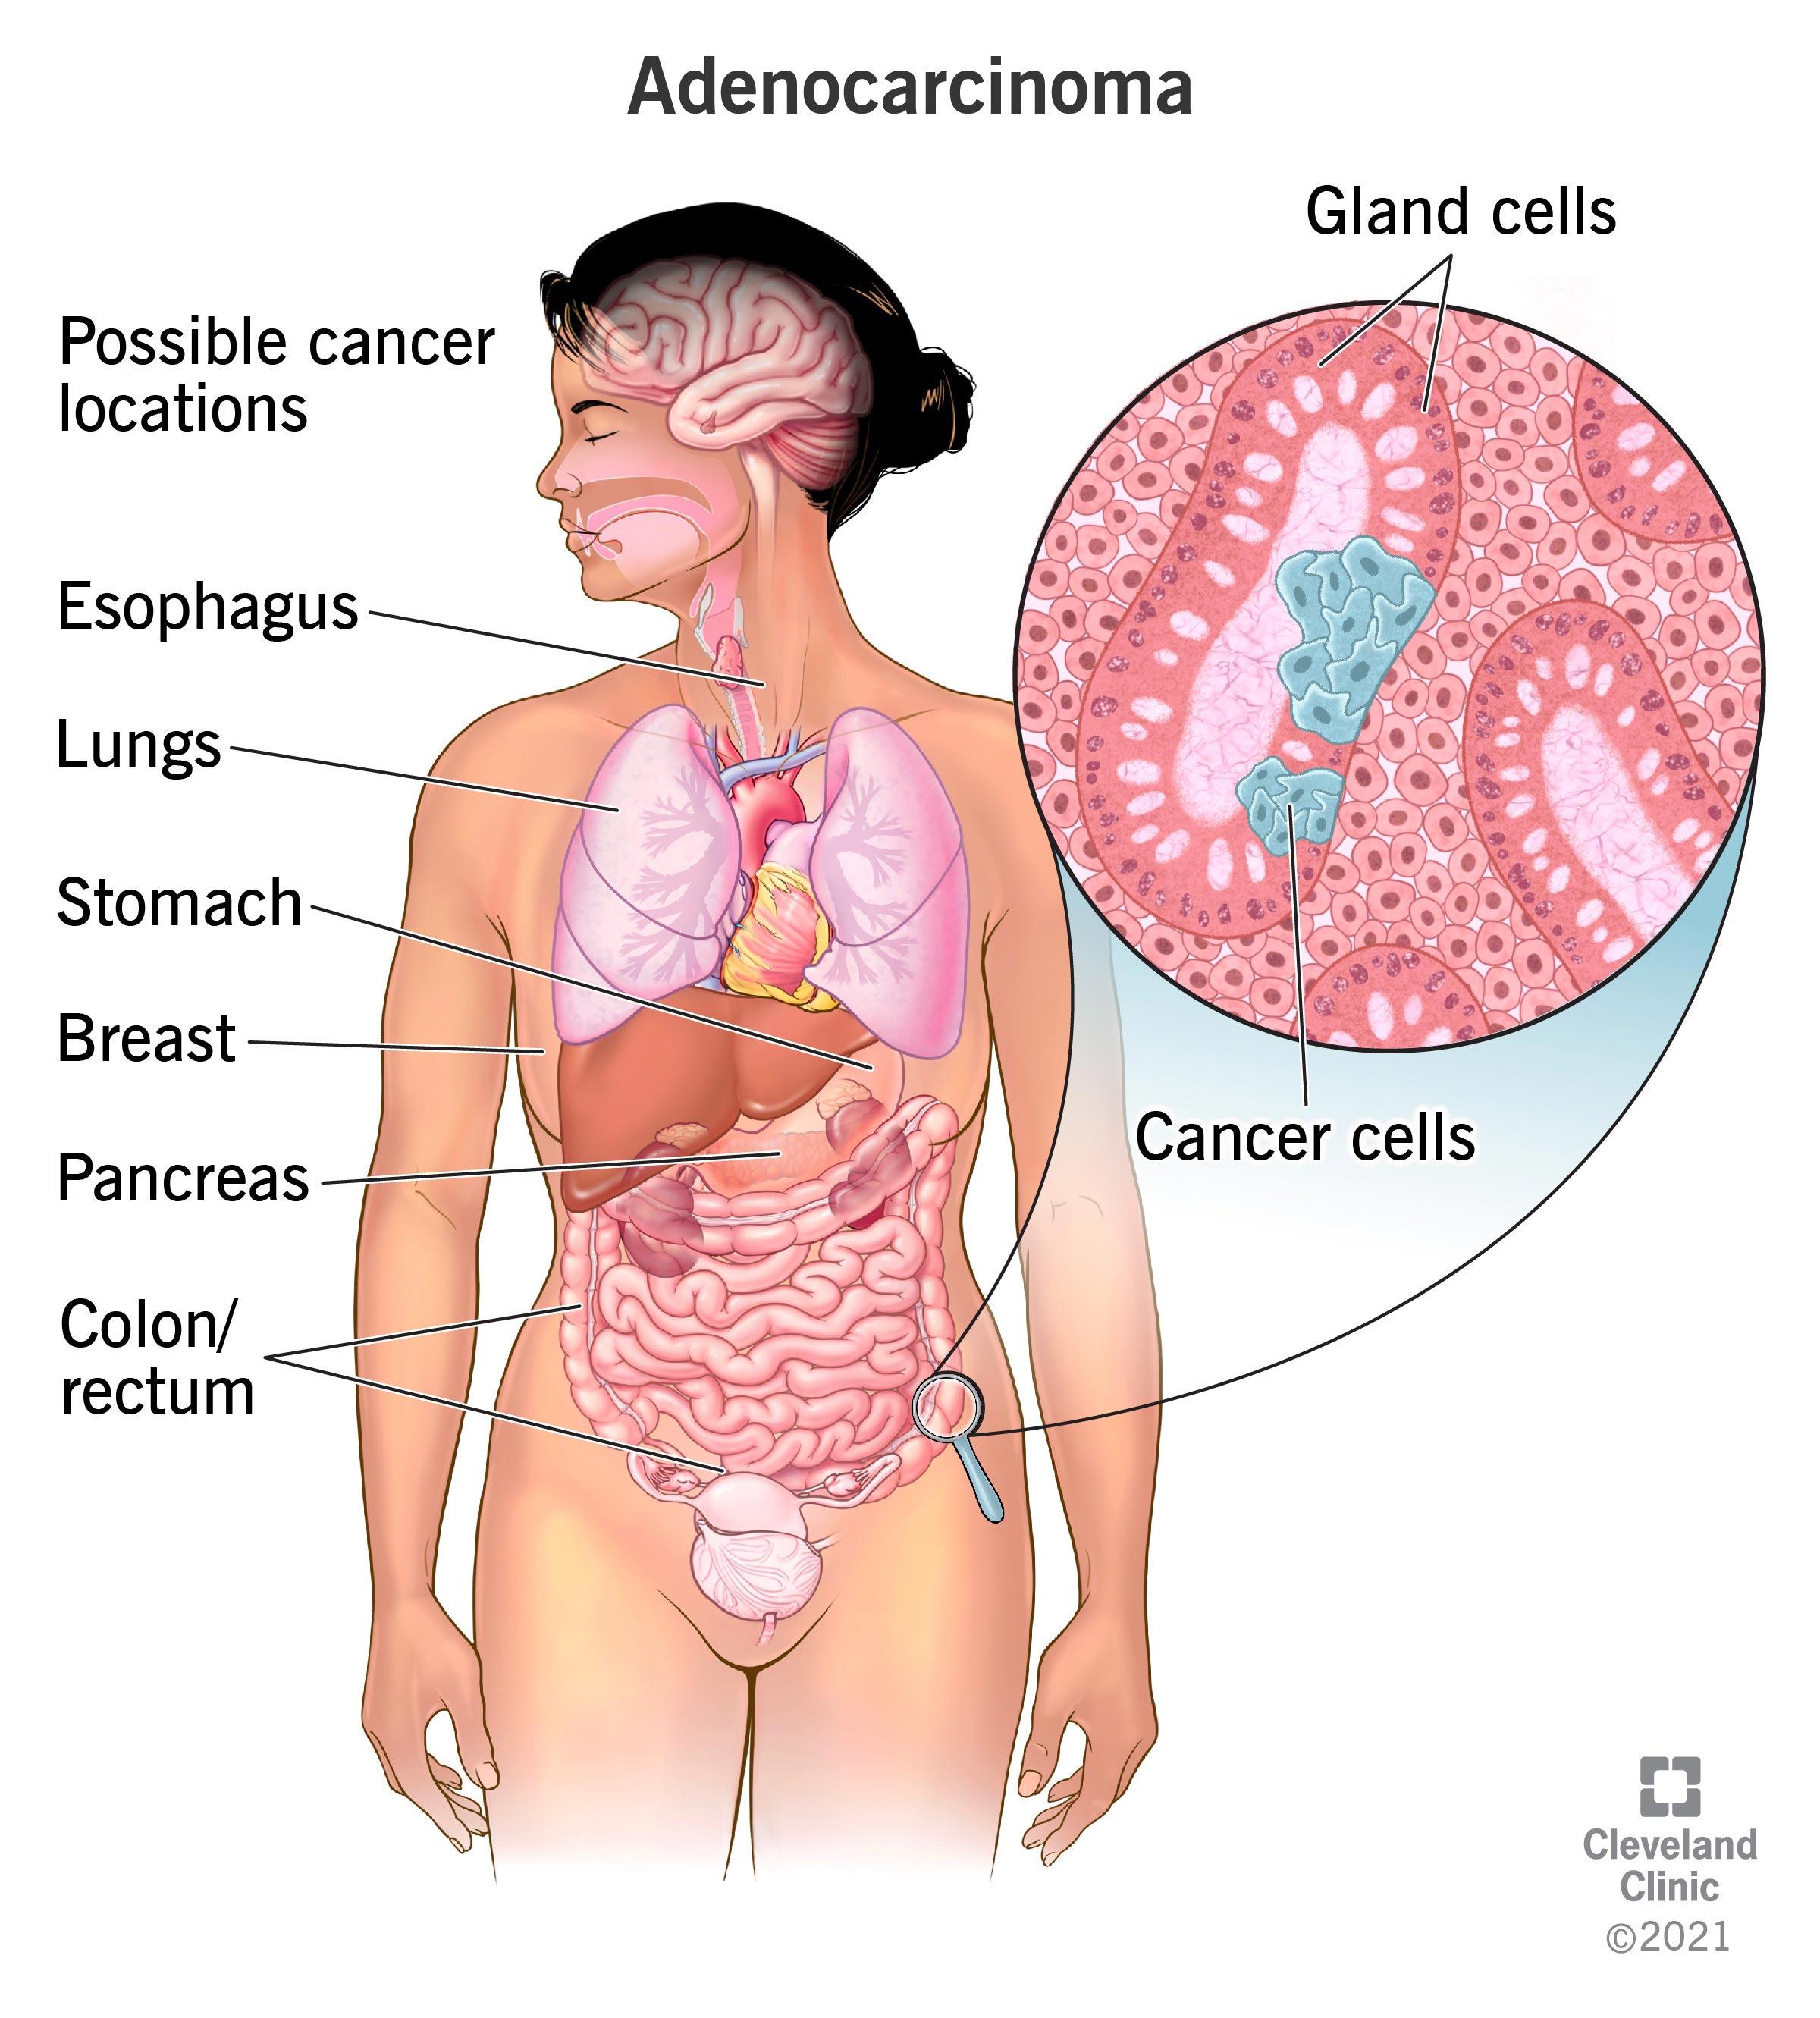 Cancer cells forming in the glandular epithelial cells lining the colon.